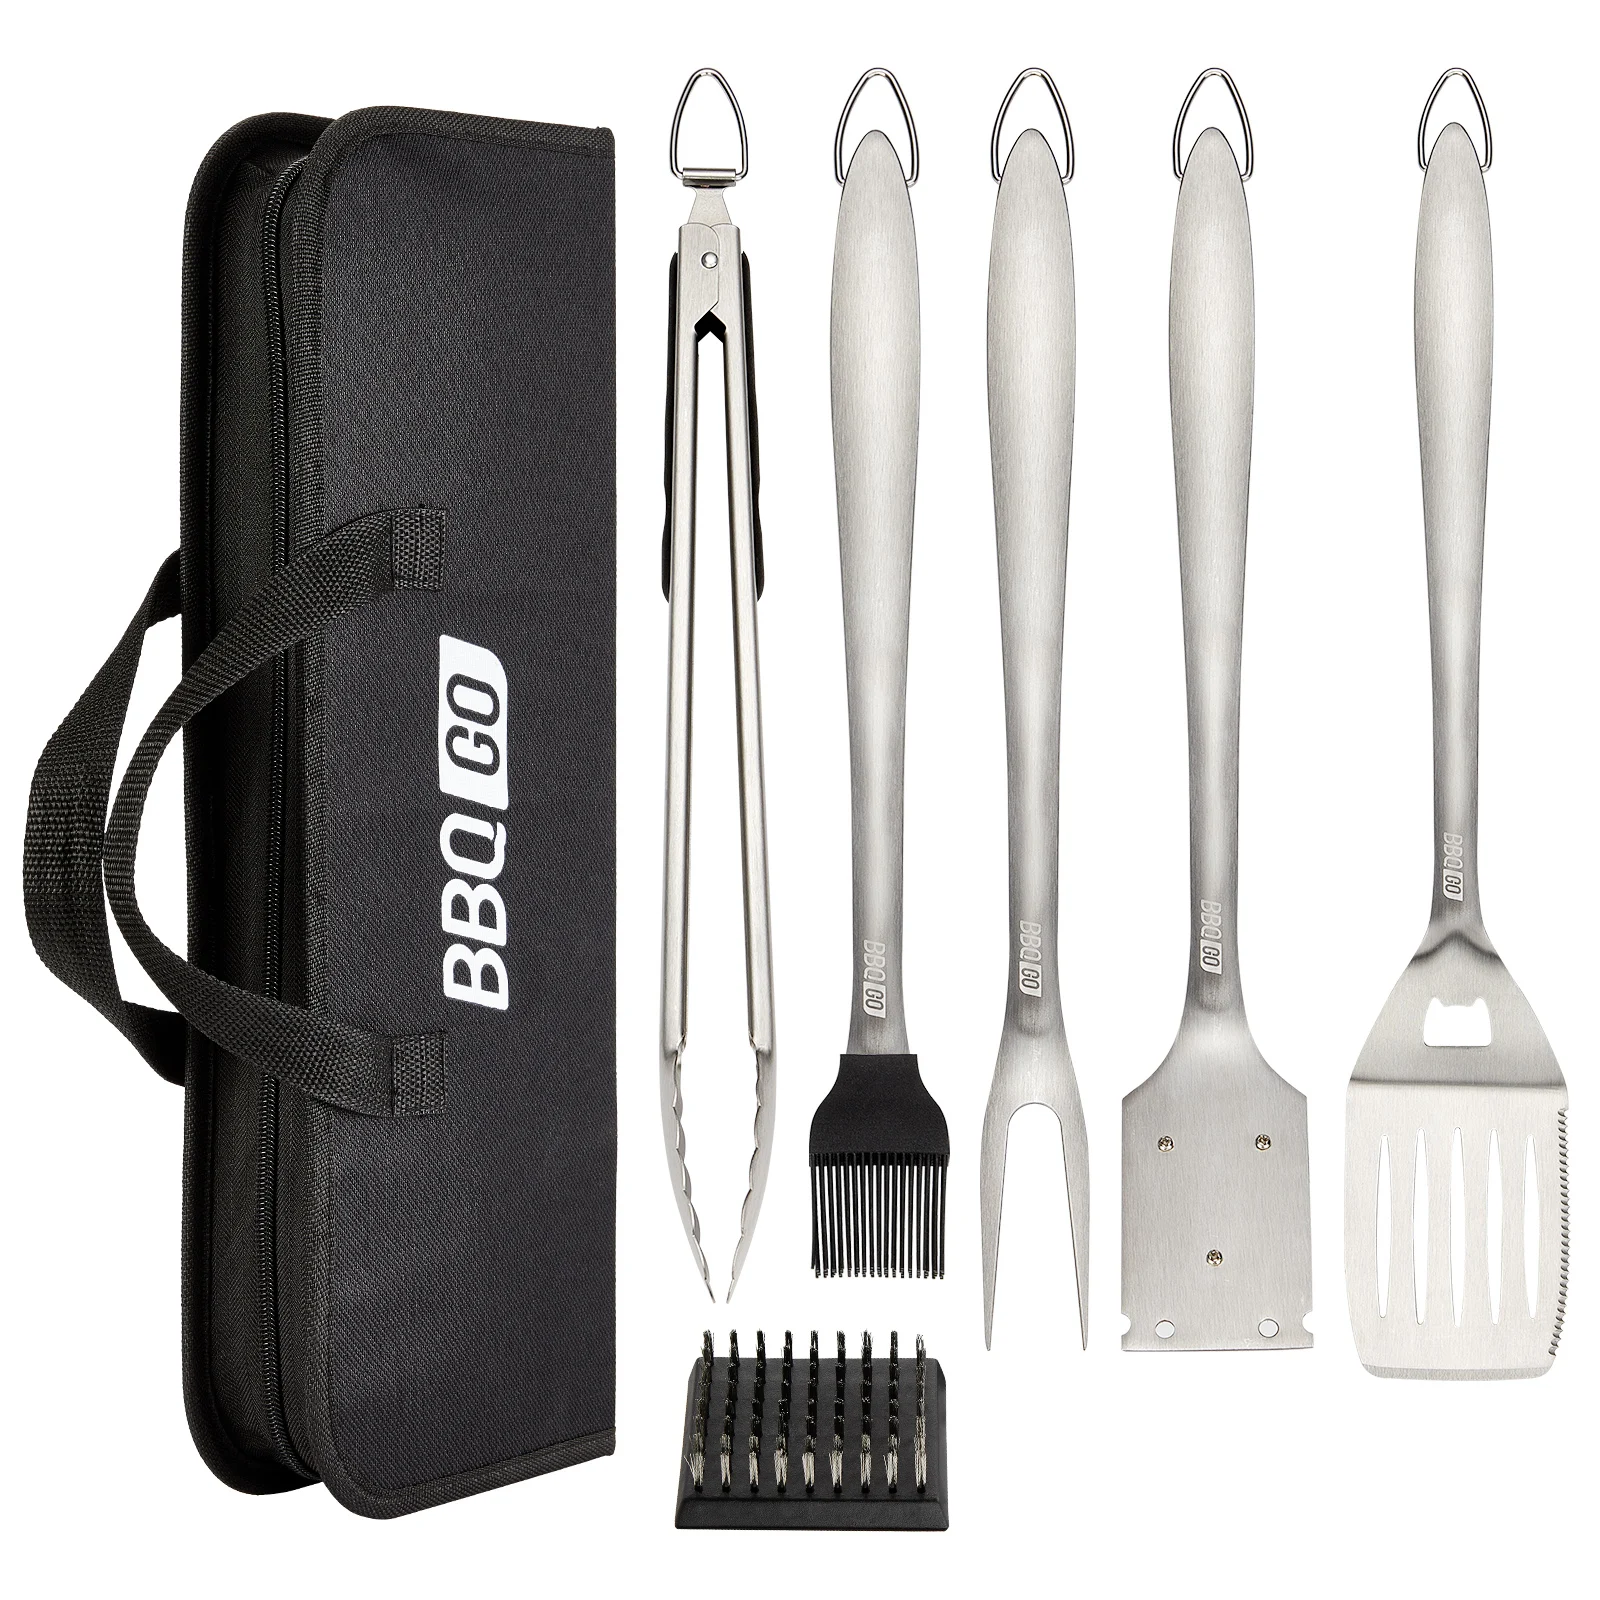 Inkbird-BBQ-Grilling-Tool-Set-Stainless-Steel-Barbecue-Accessories-In ...